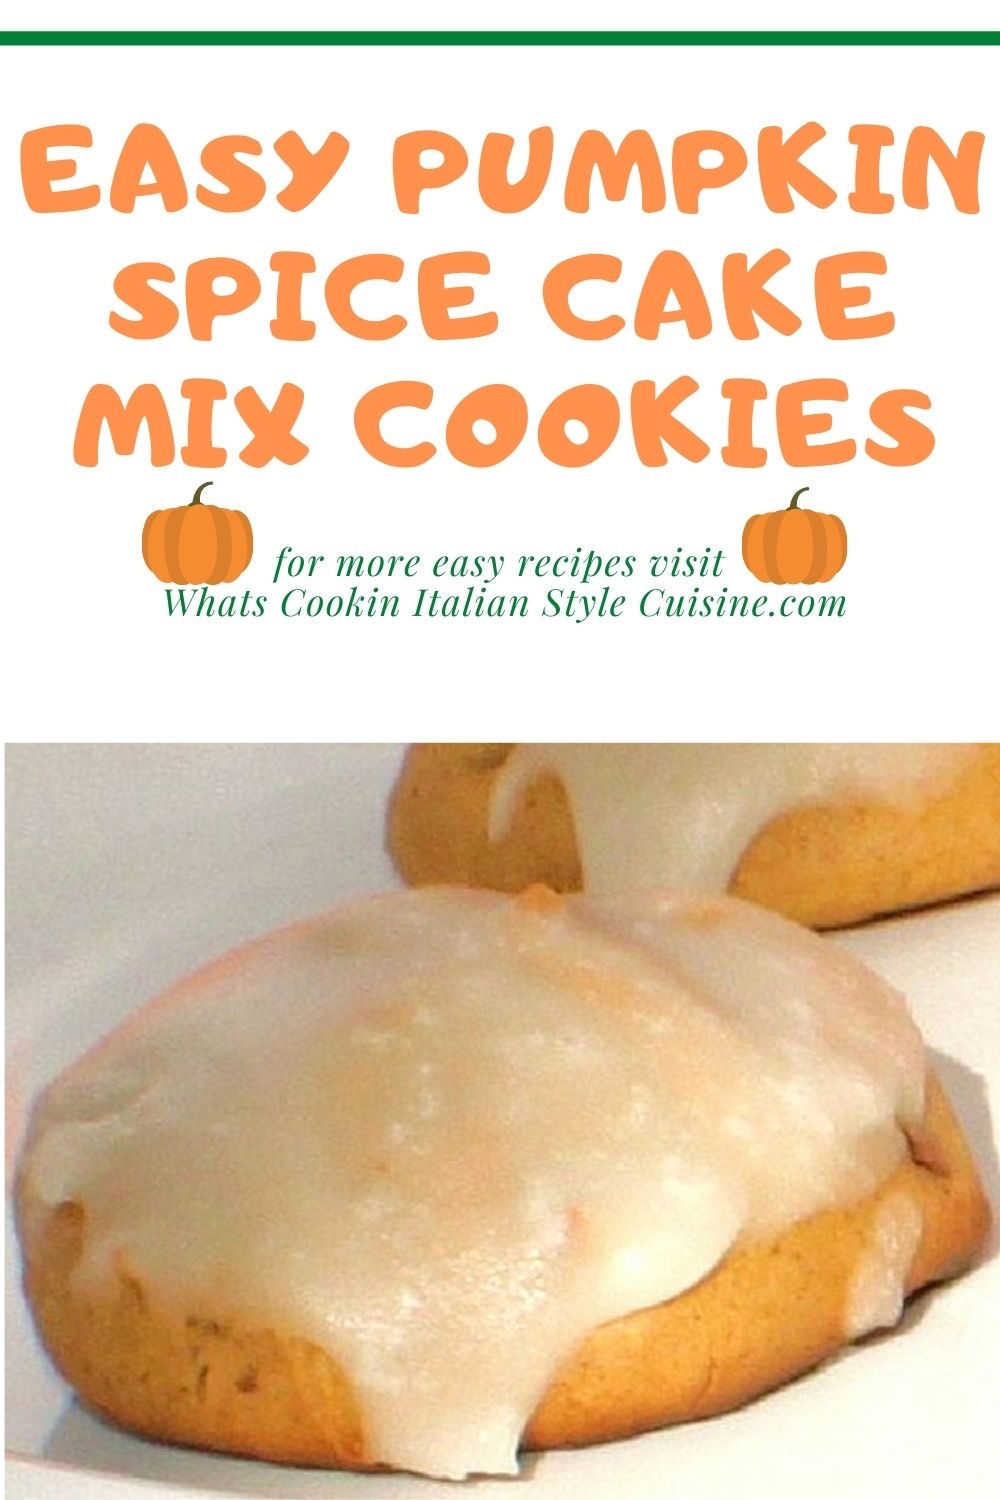 this is a pin on how to make pumpkin spice cookies with a cake mix